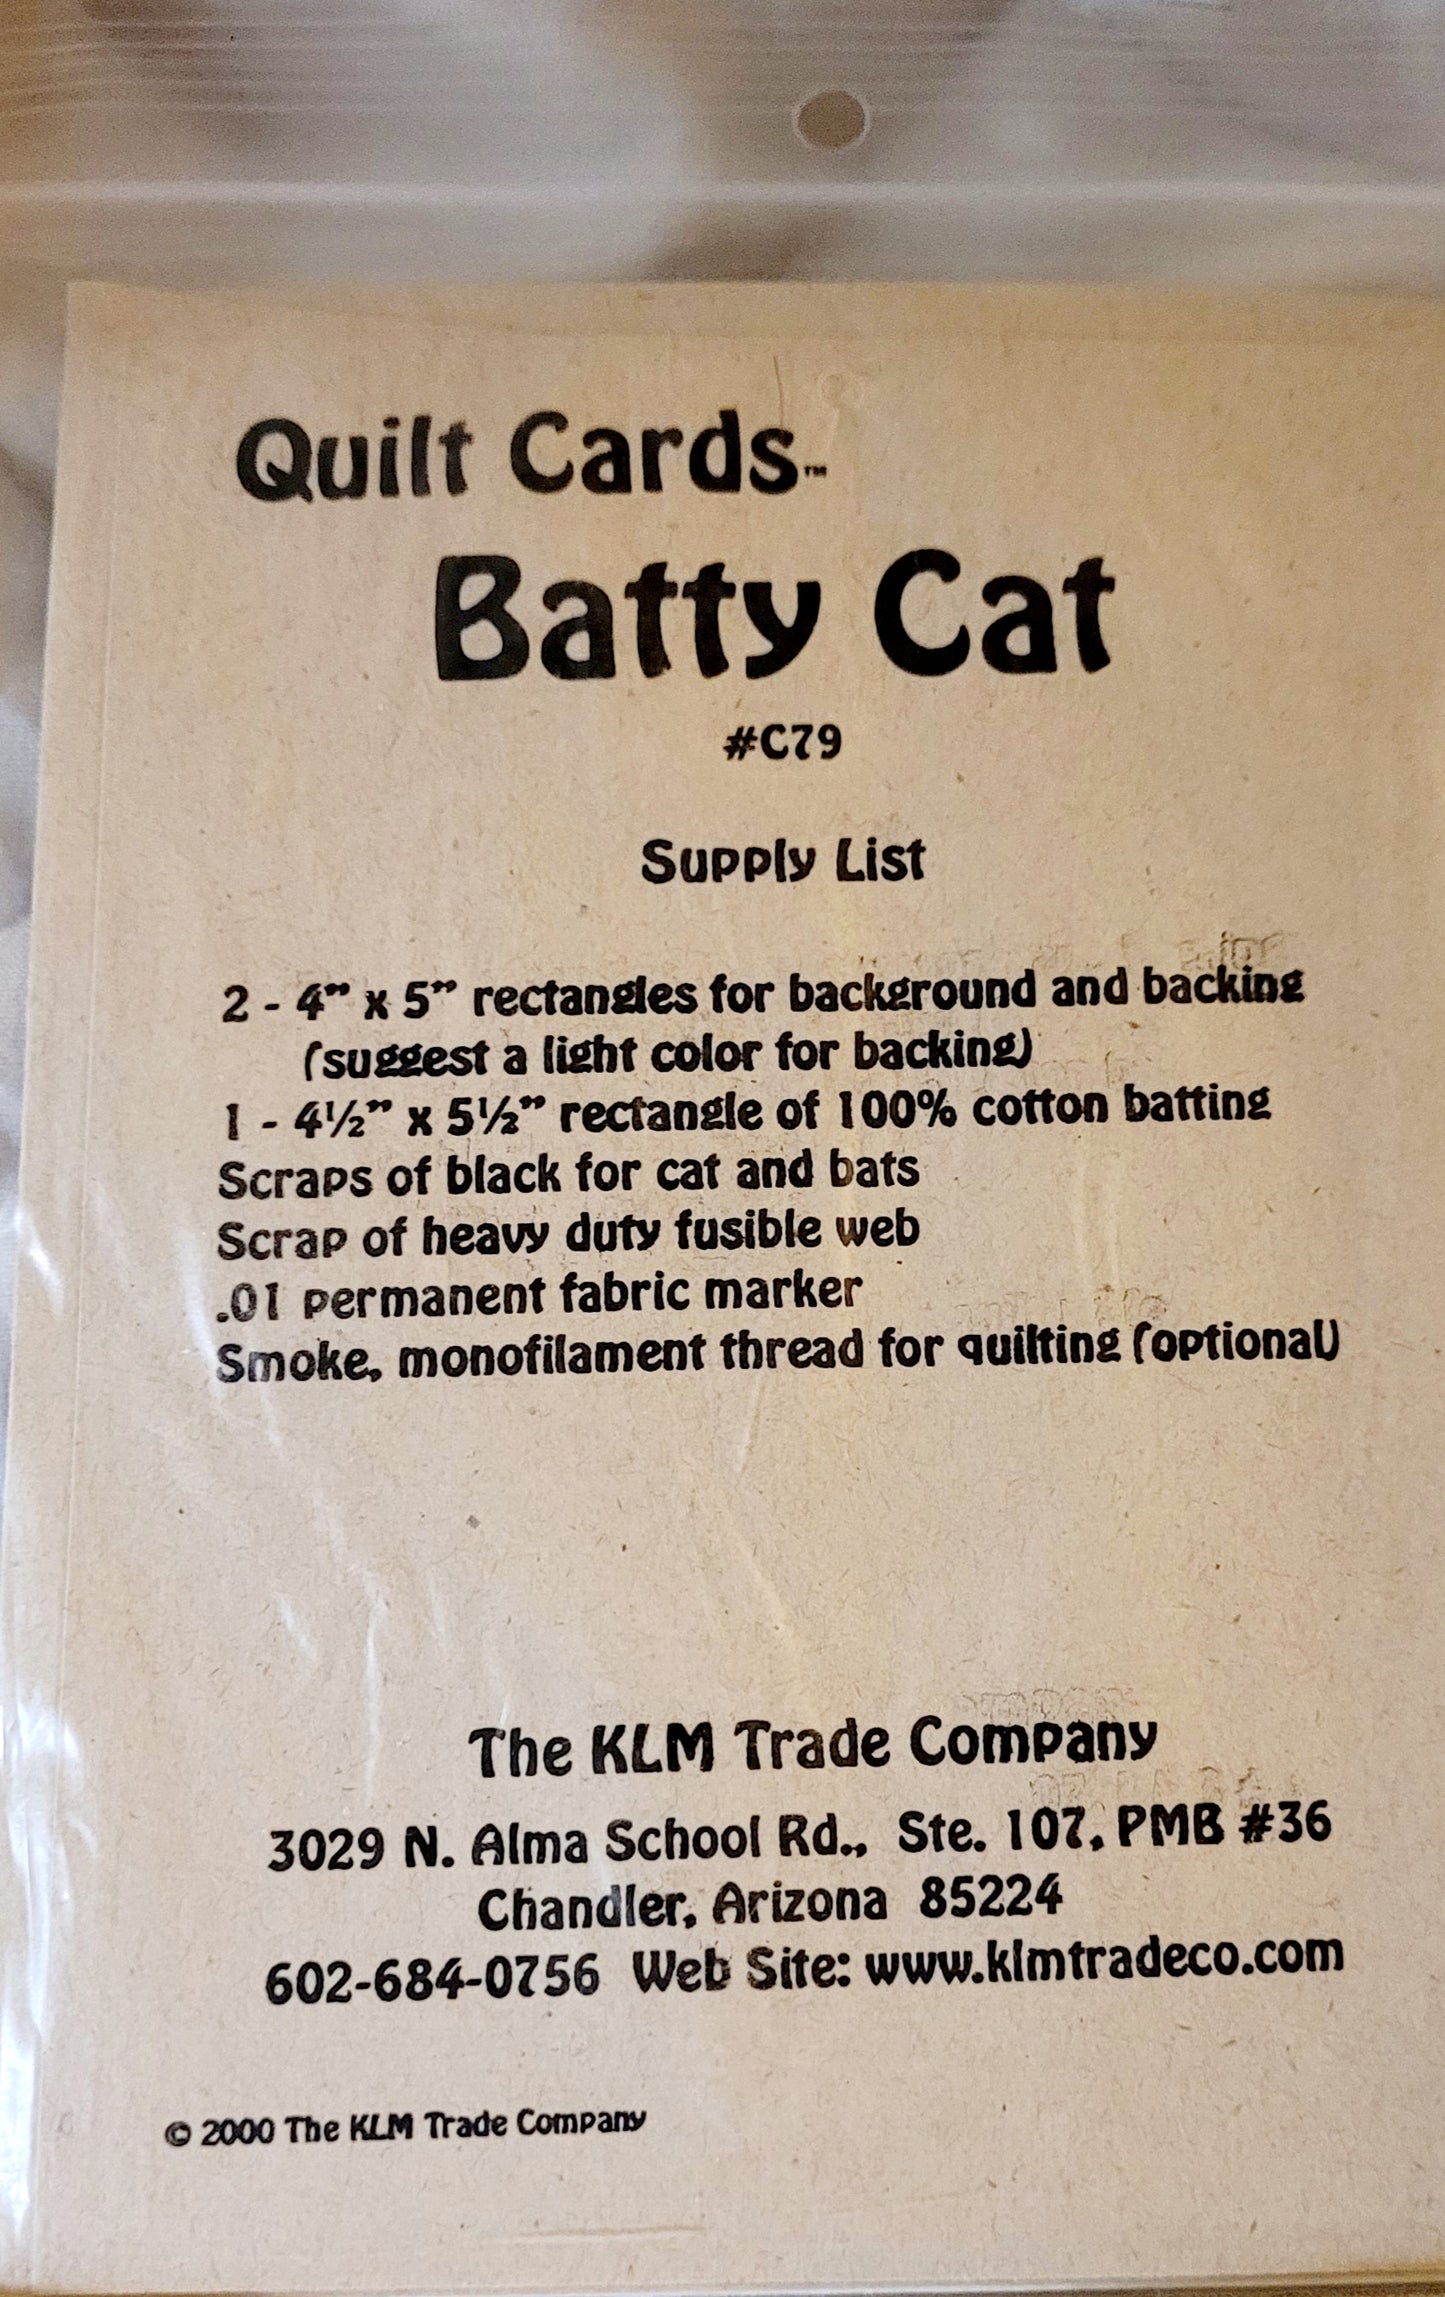 "Batty Cat" #C79 Quilt Cards by KLM Trading Co. *BRAND NEW